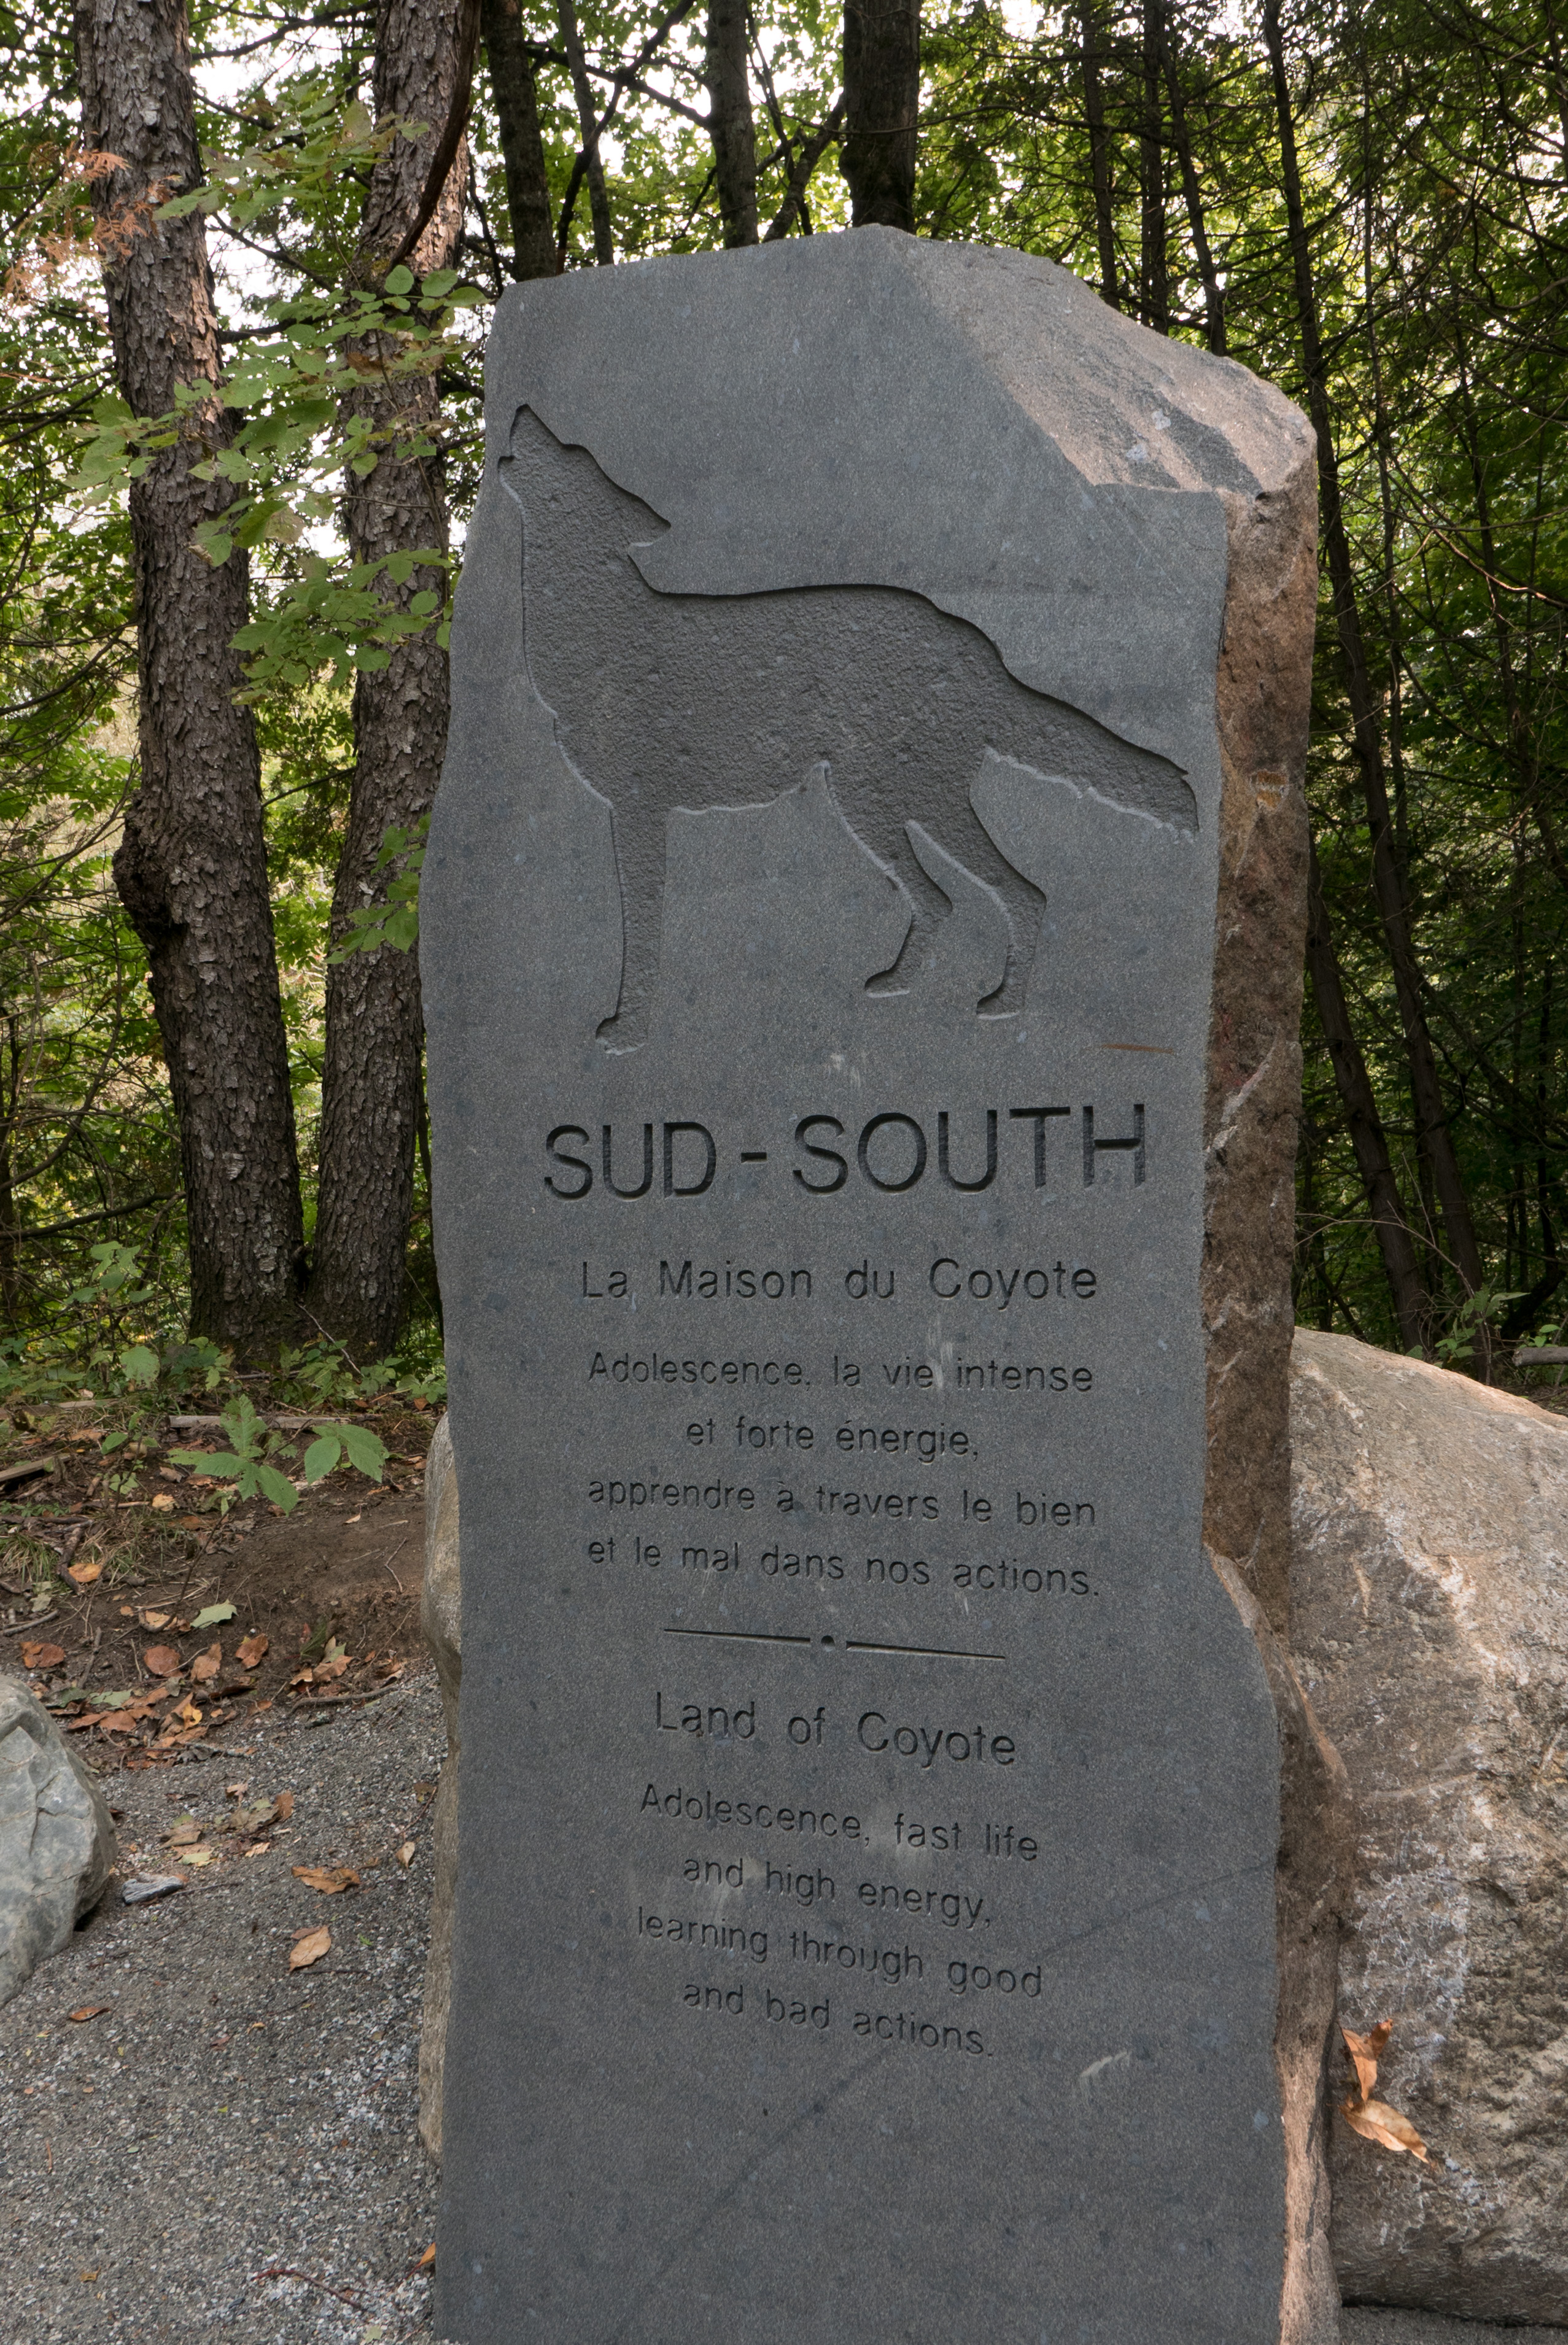 The animal spirit for the South is a coyote.